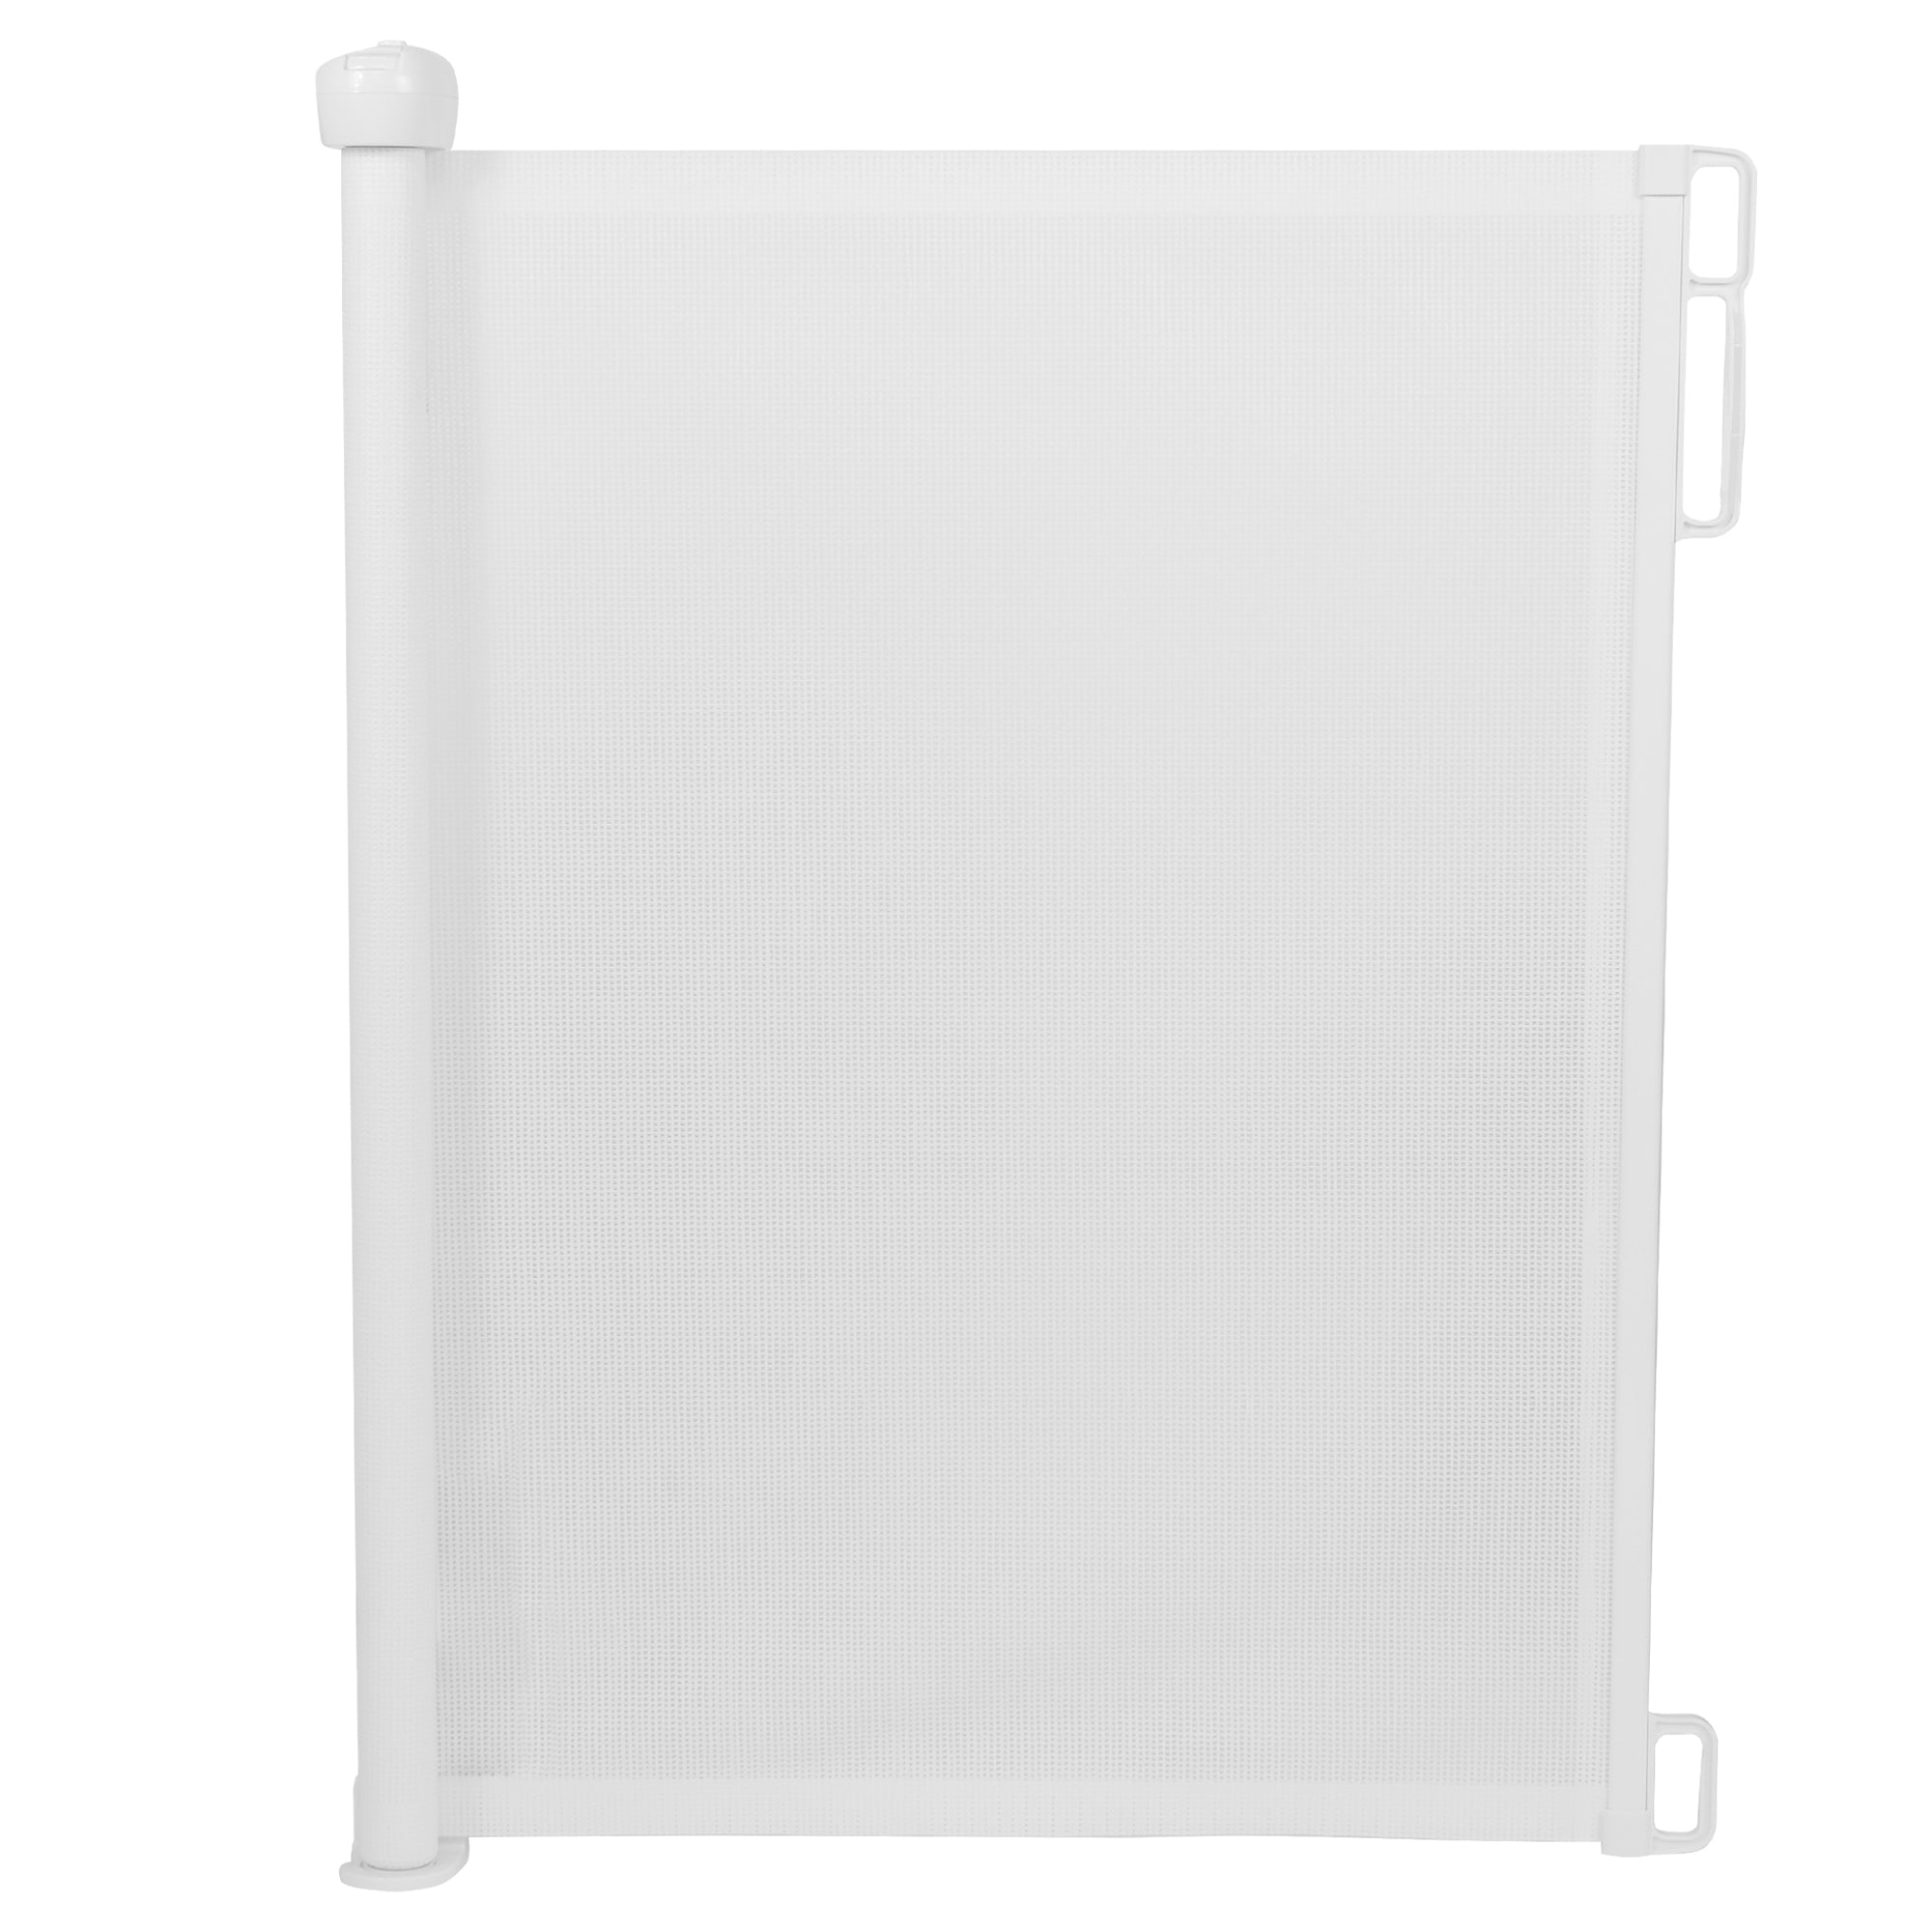 Child Safety Gate Retractable Baby Gate 34.4" Tall, Extends to 59" Wide, White